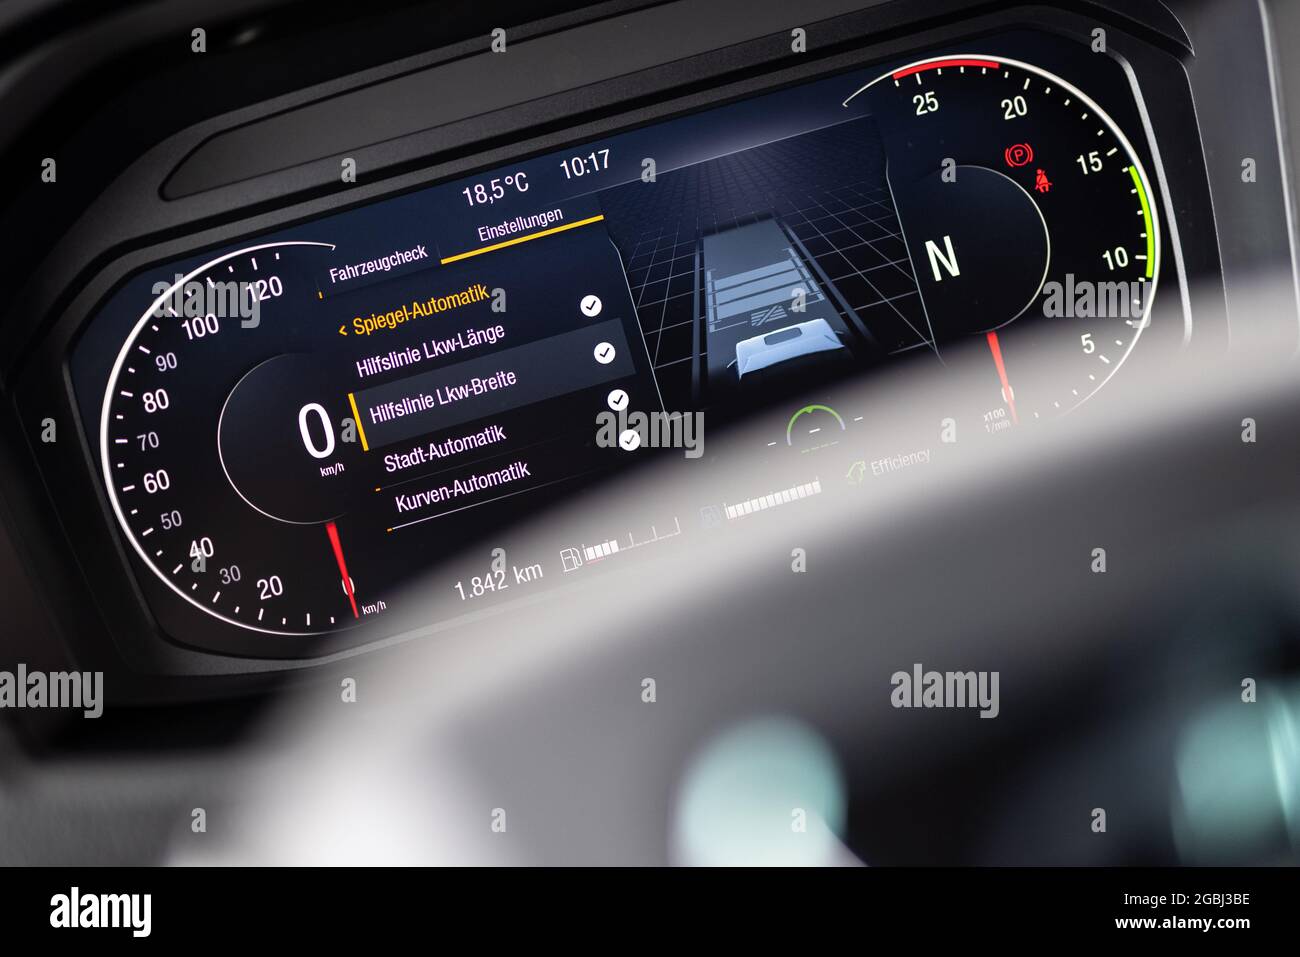 Schweitenkirchen, Germany. 04th Aug, 2021. The instrument display of a  truck shows the setting options for the truck's digital exterior mirrors  during a press event to demonstrate the digital mirror replacement system "